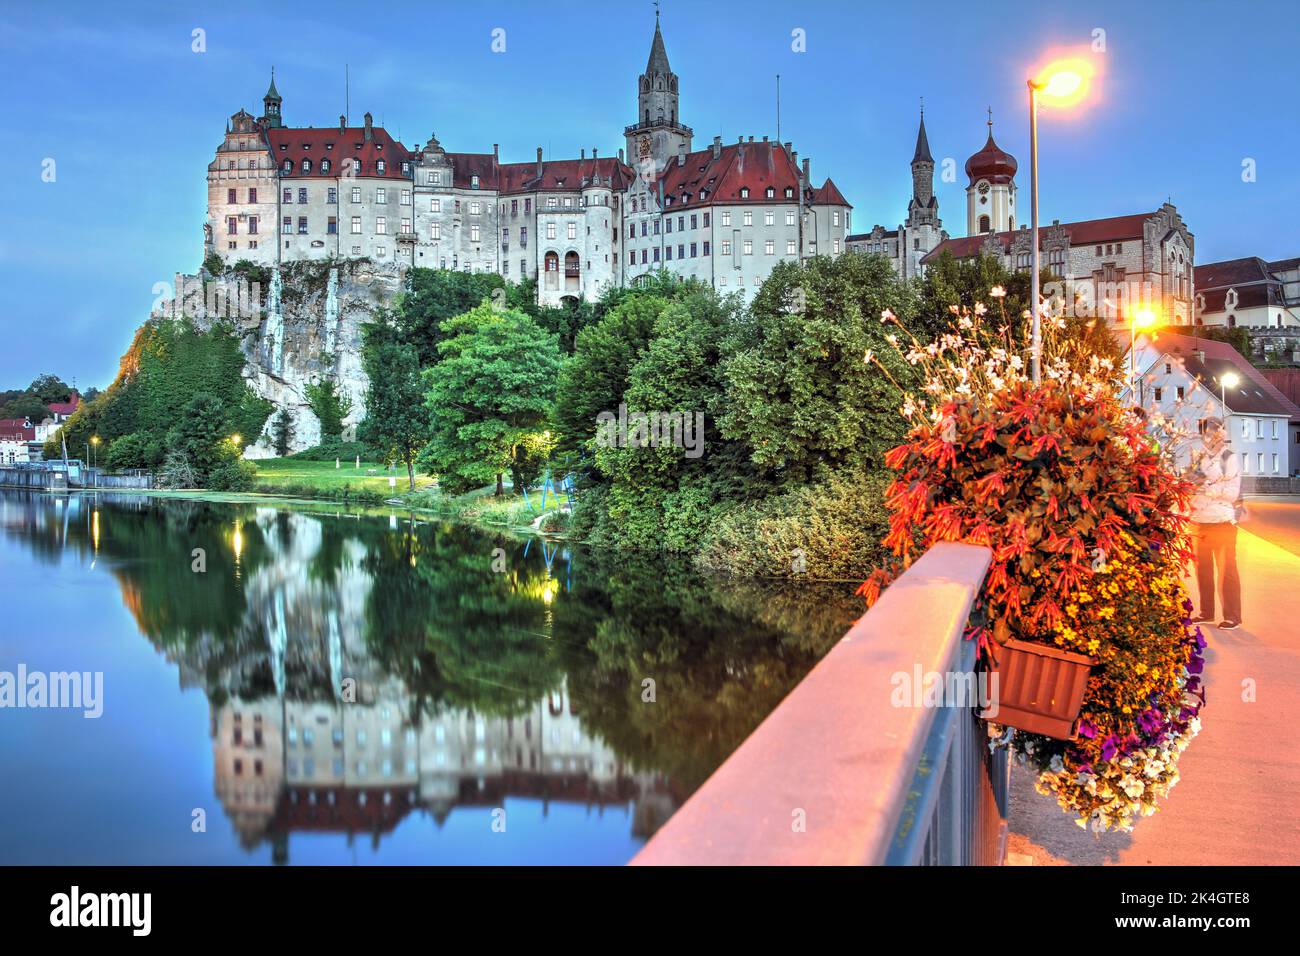 Schloss (Castle) Sigmaringen, a historic Hohenzollern stronghold along the Danube in Swabian Alb region of Baden-Württemberg at night. Stock Photo